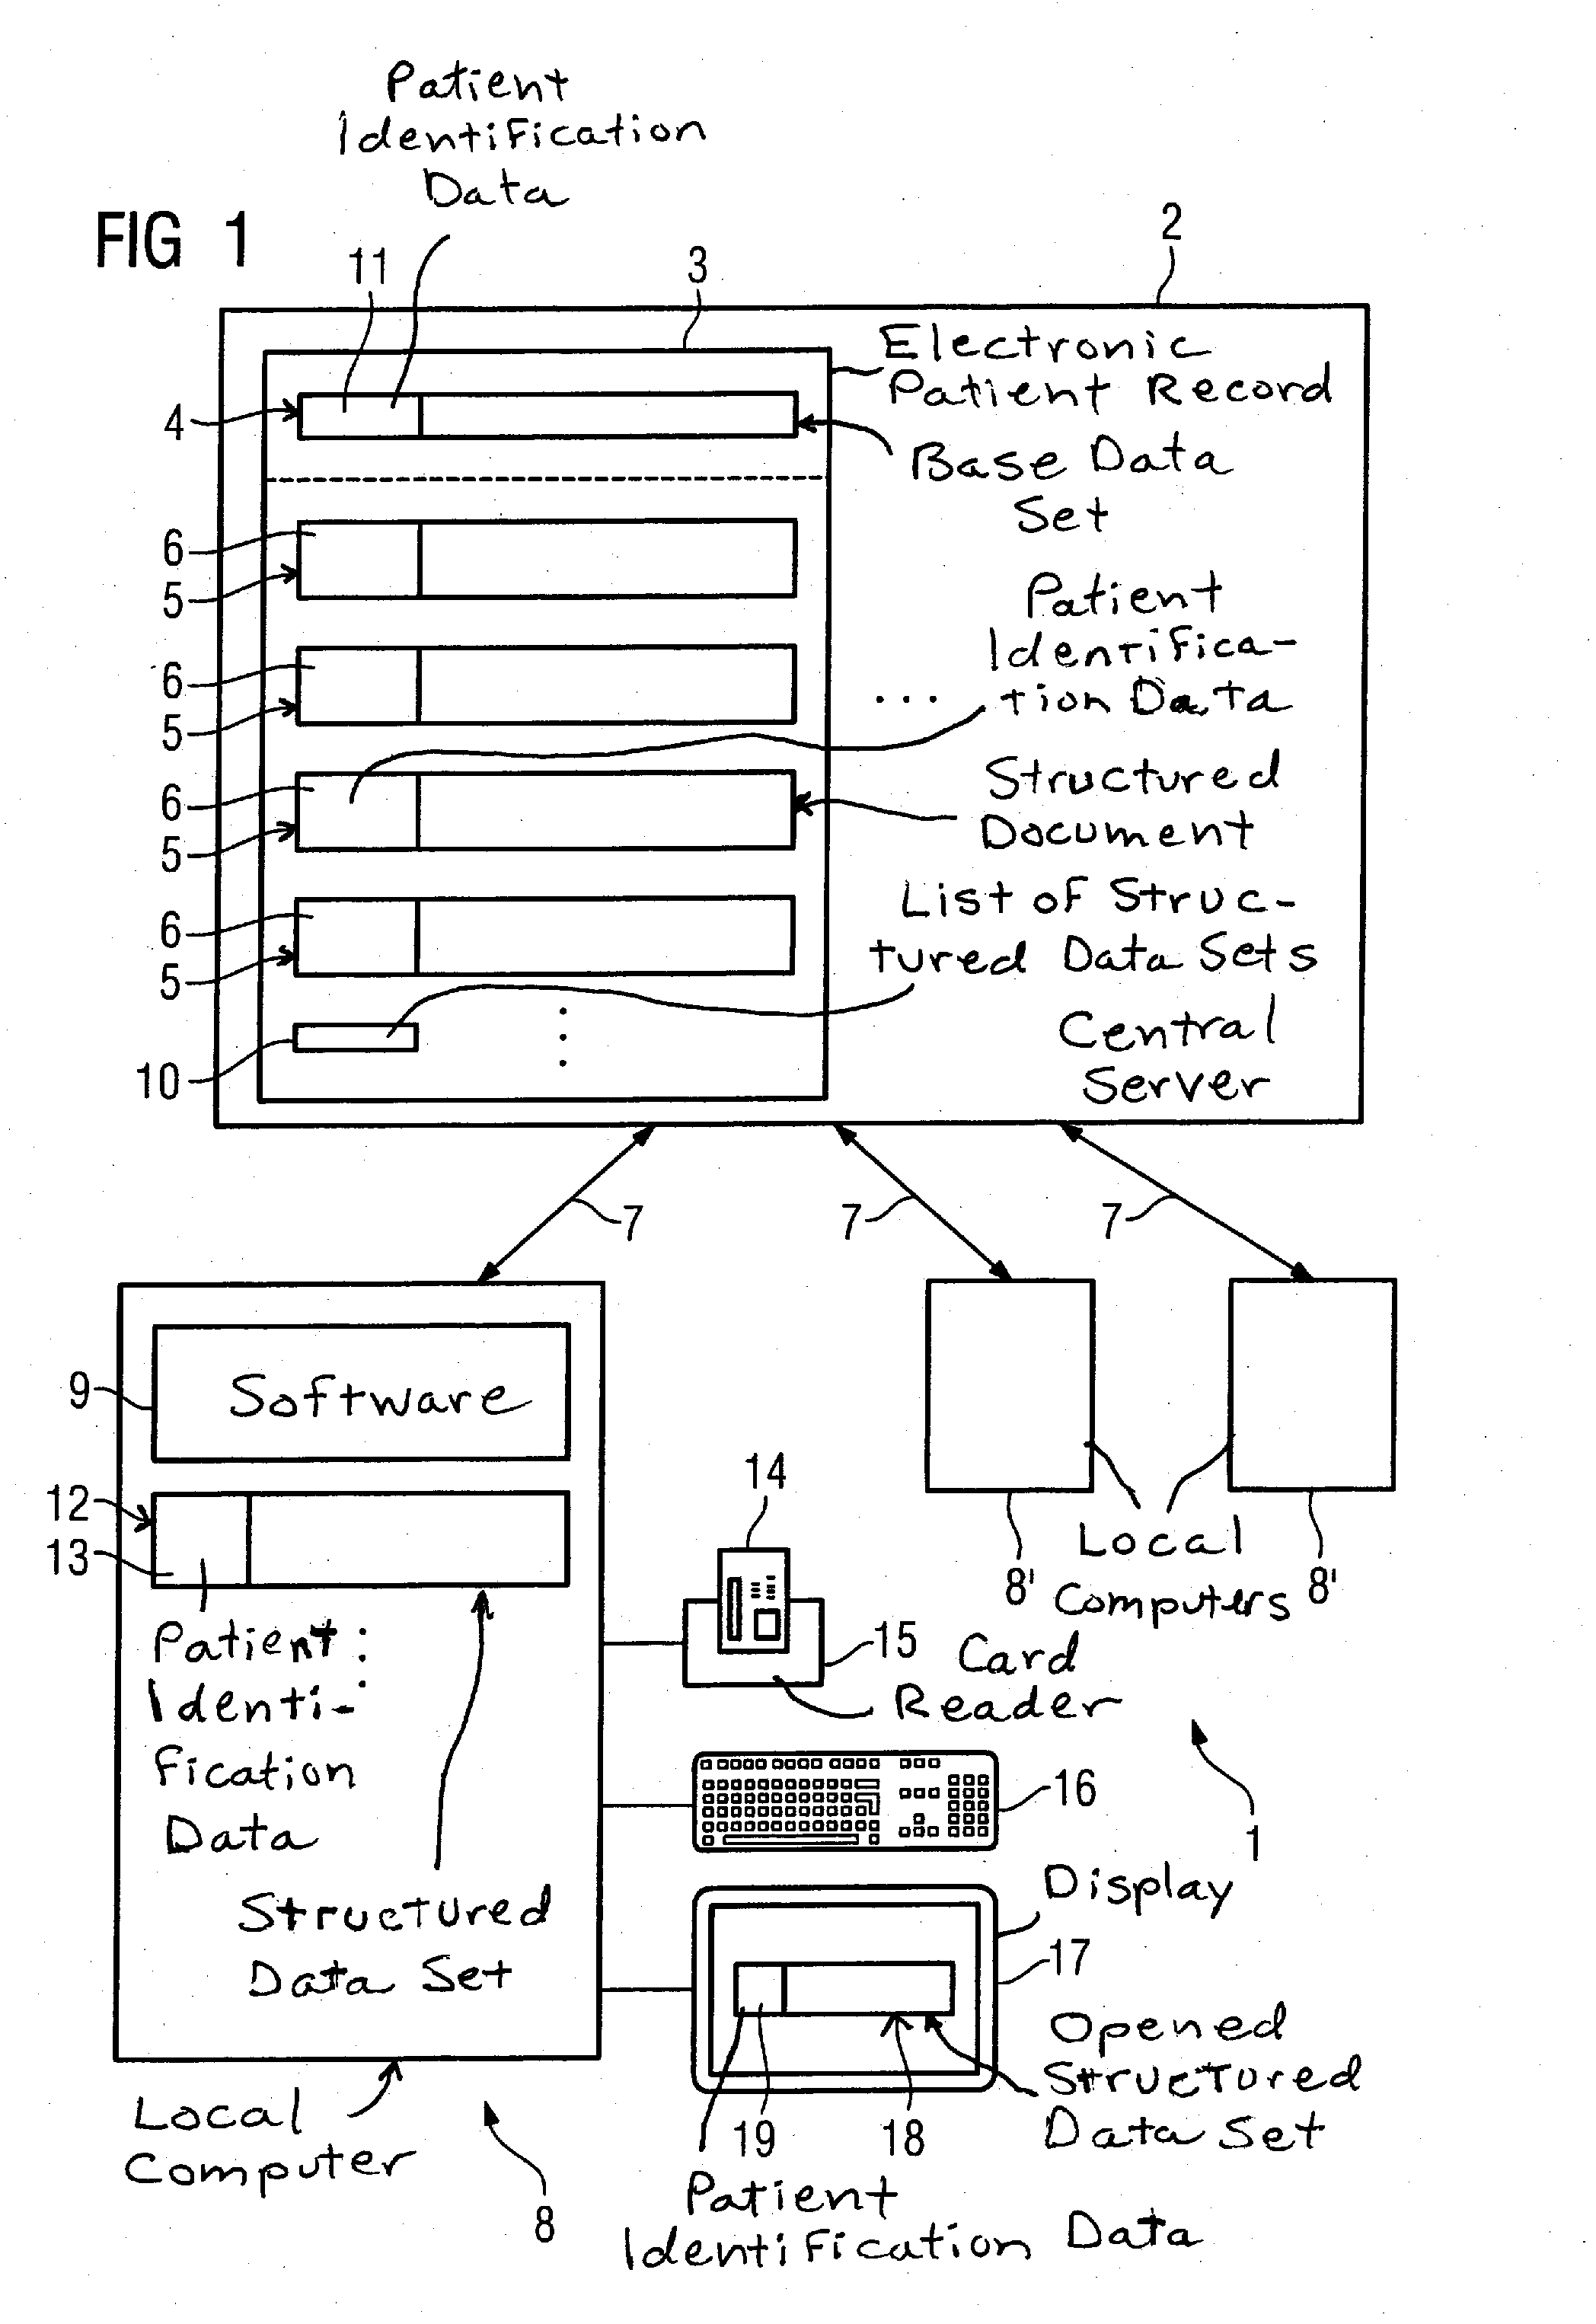 Method for association checking of structured data sets from which patient identification data can be determined in a patient administration system with electronic patient records